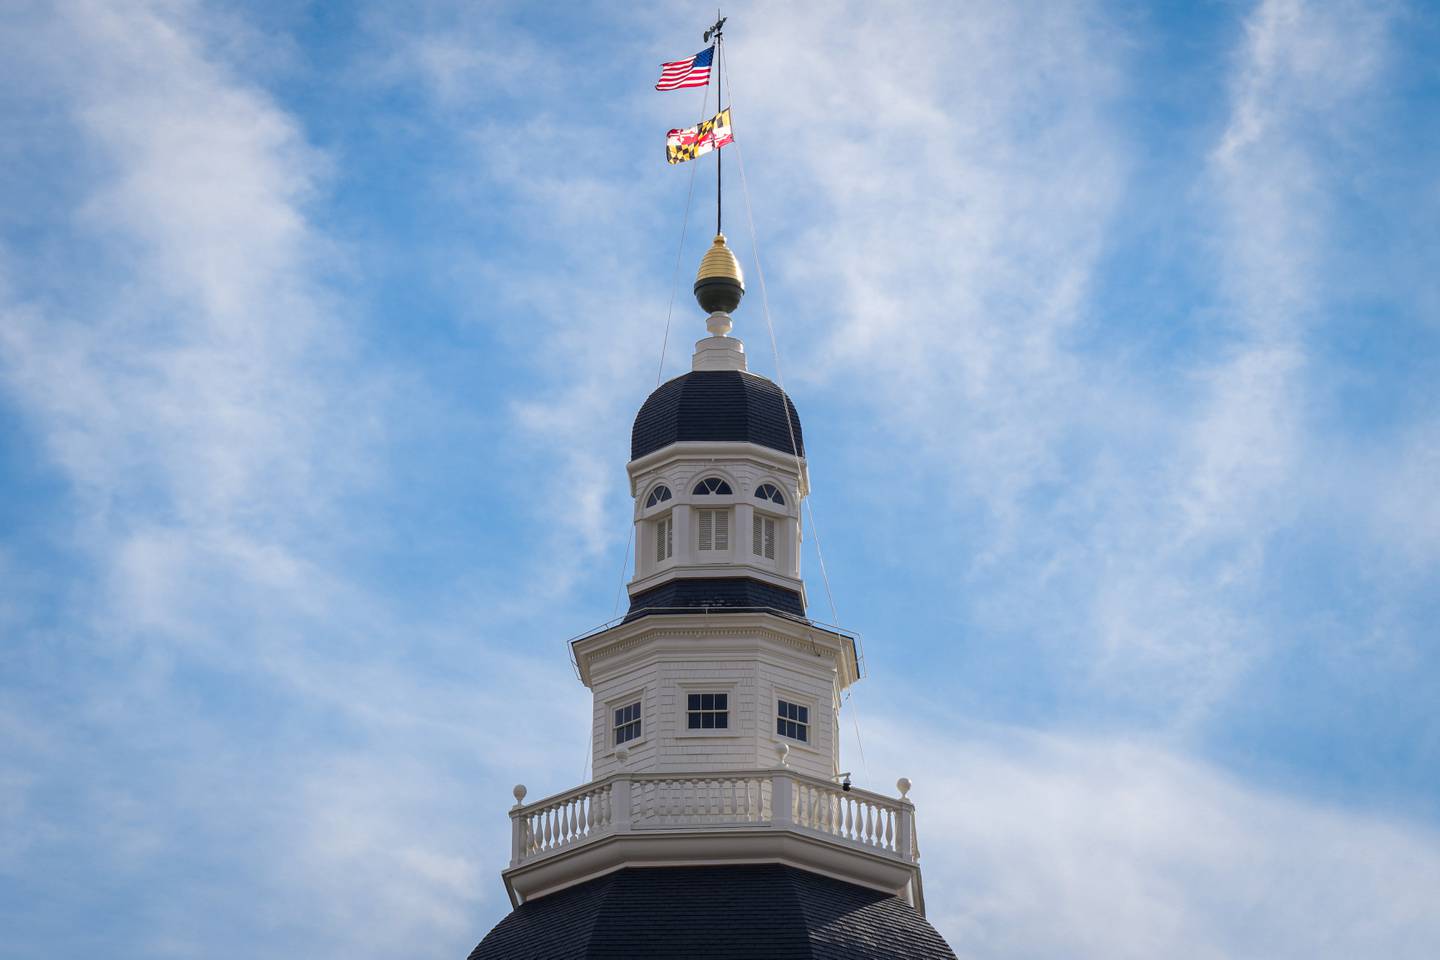 Exterior of the Maryland State House.